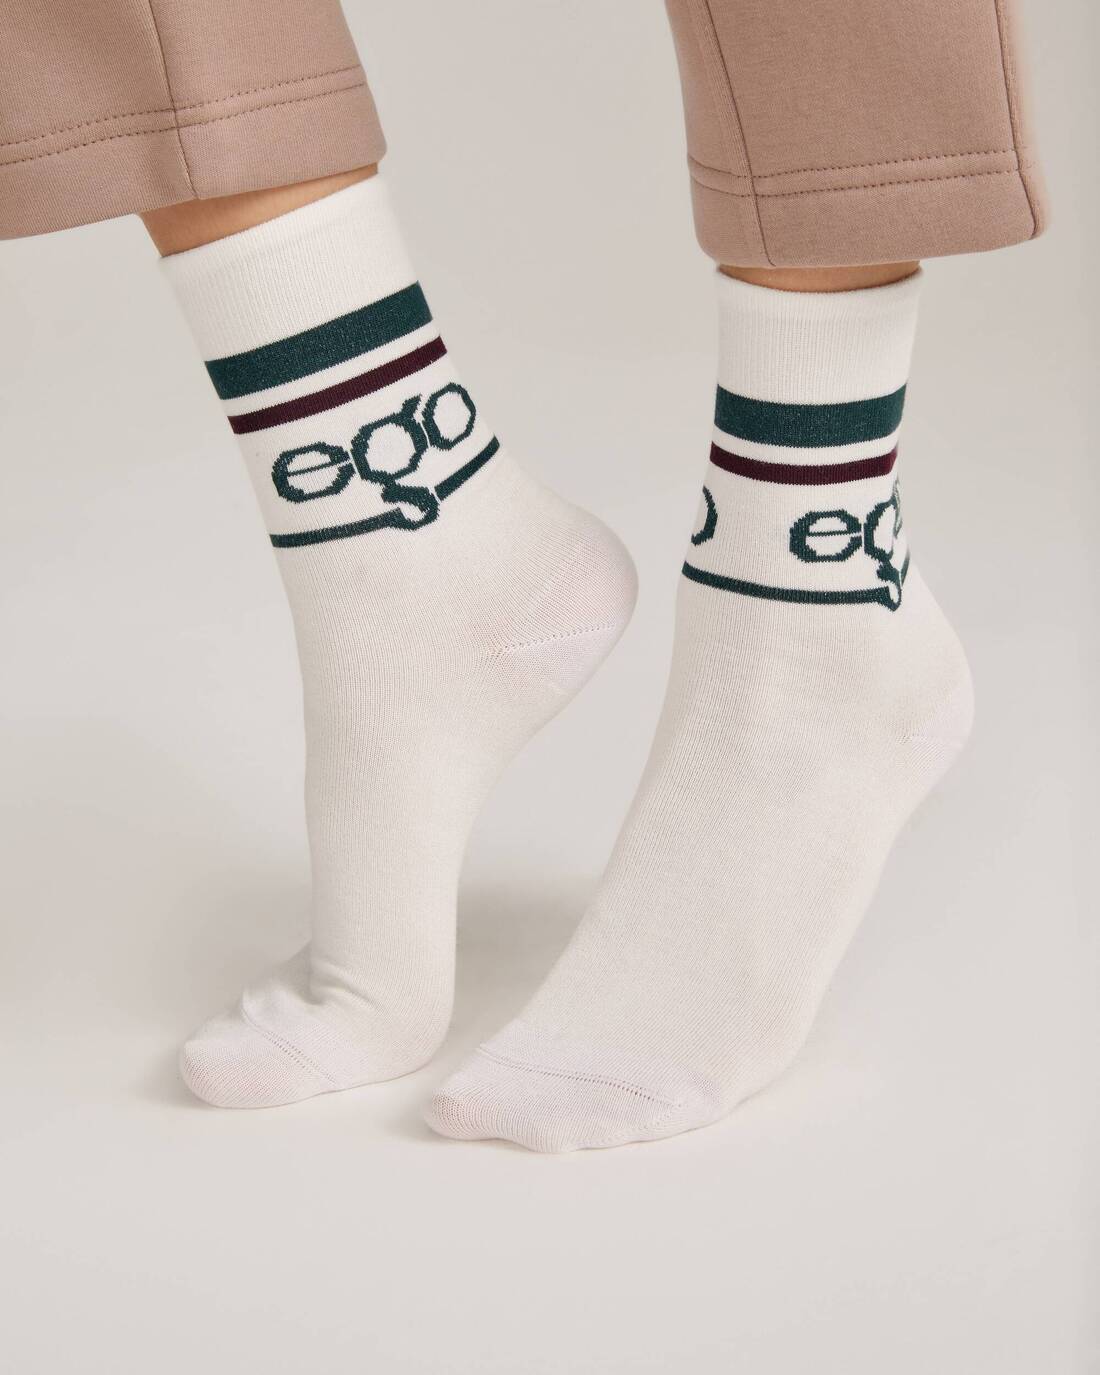 Socks with Ego embroidery